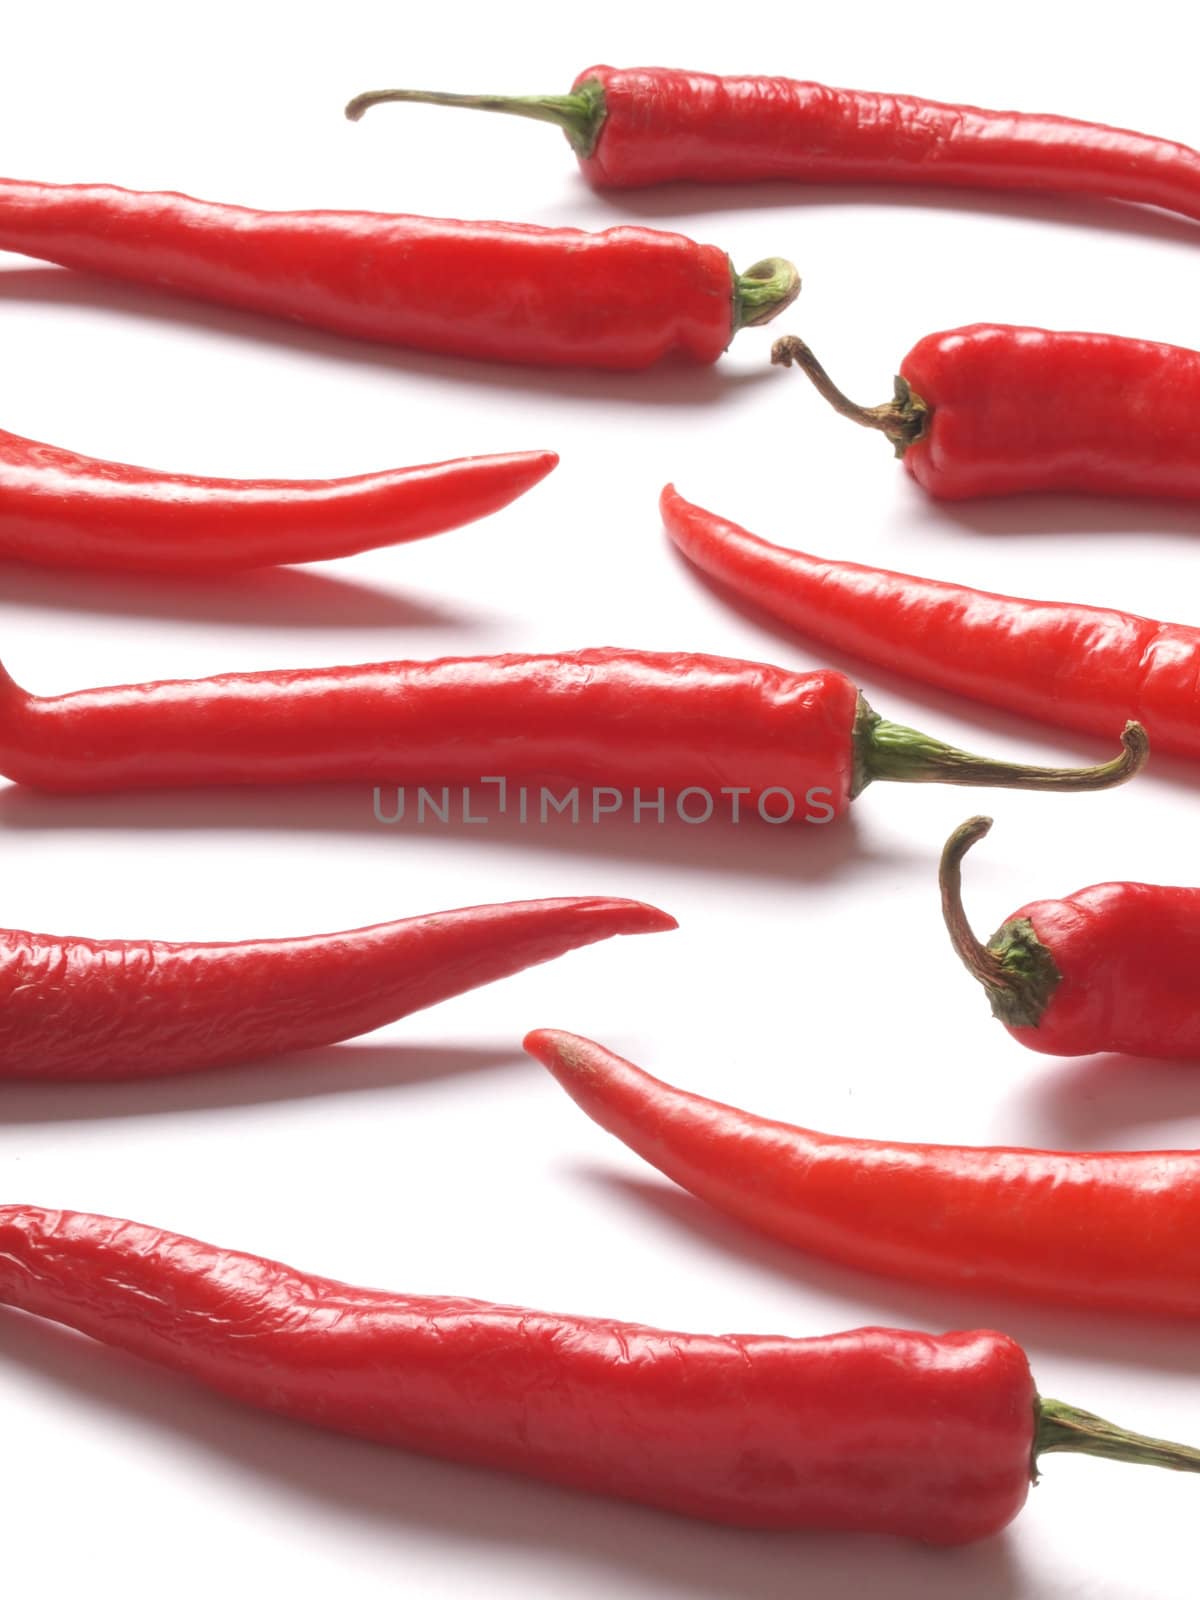 red chilies by zkruger